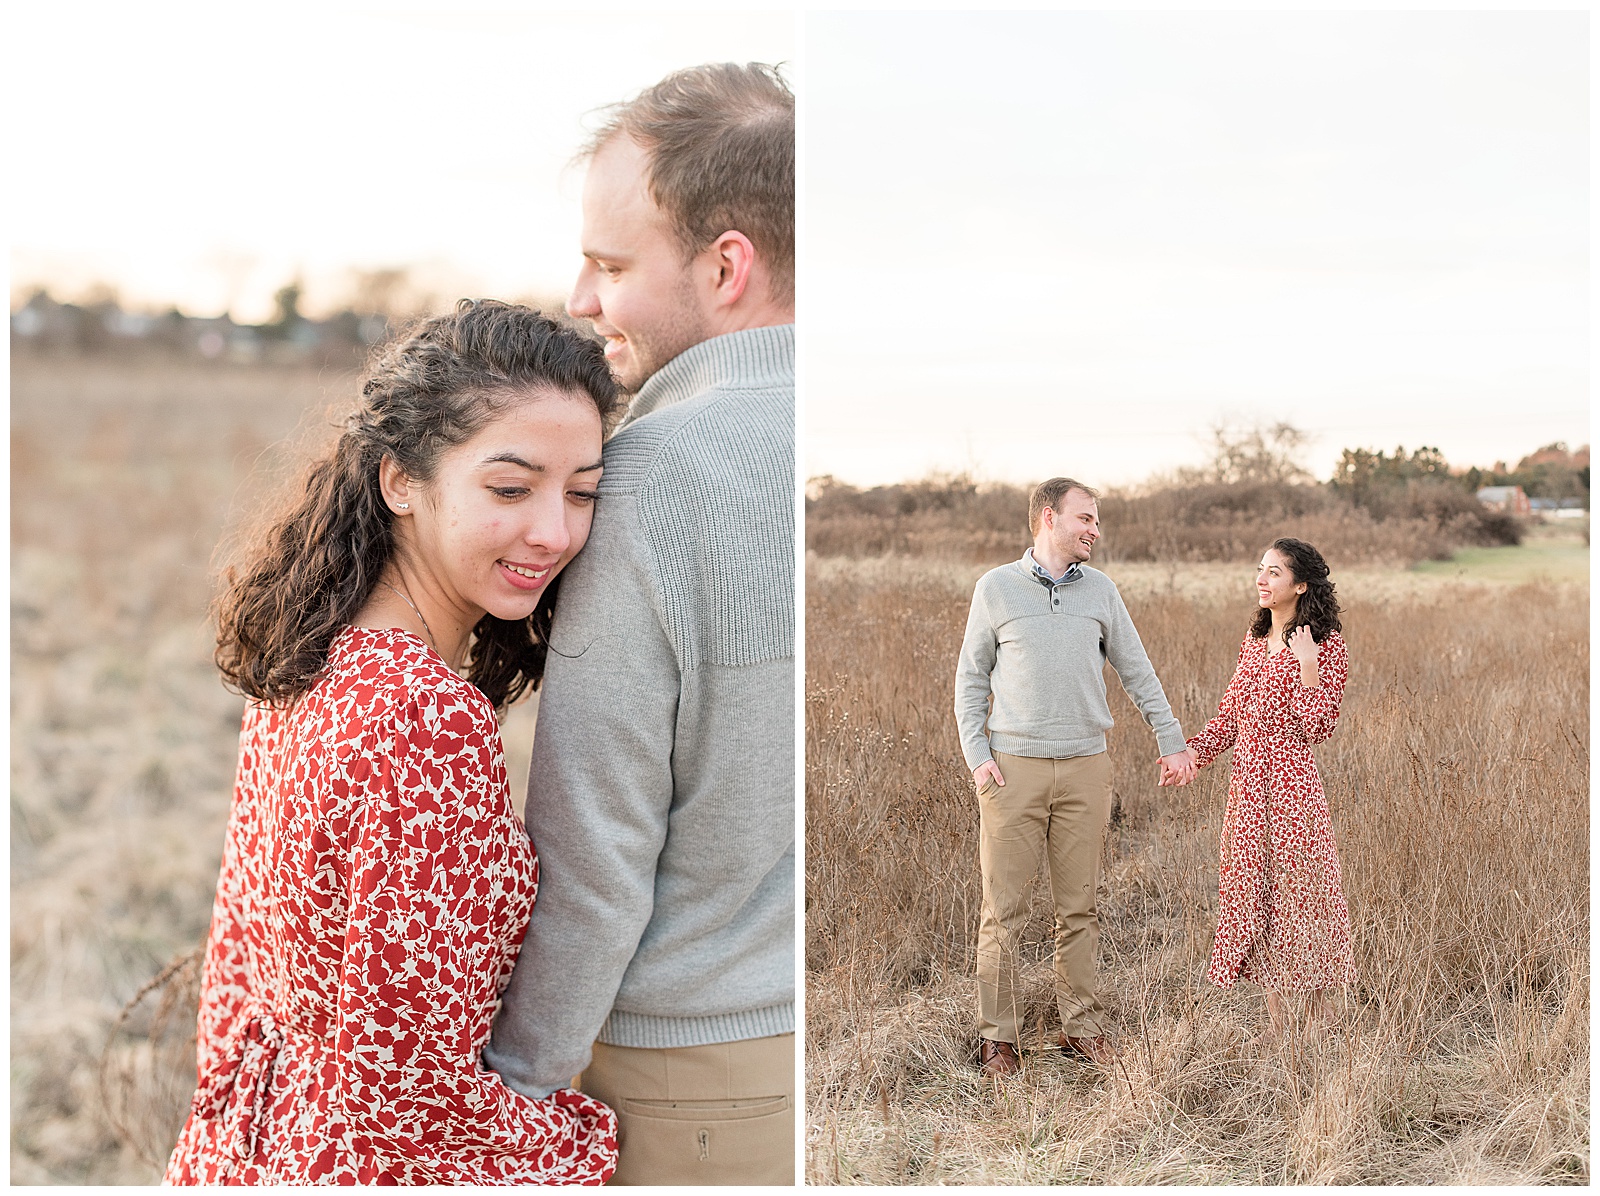 engaged couple smiles and stands close together in field of tall grasses on winter afternoon